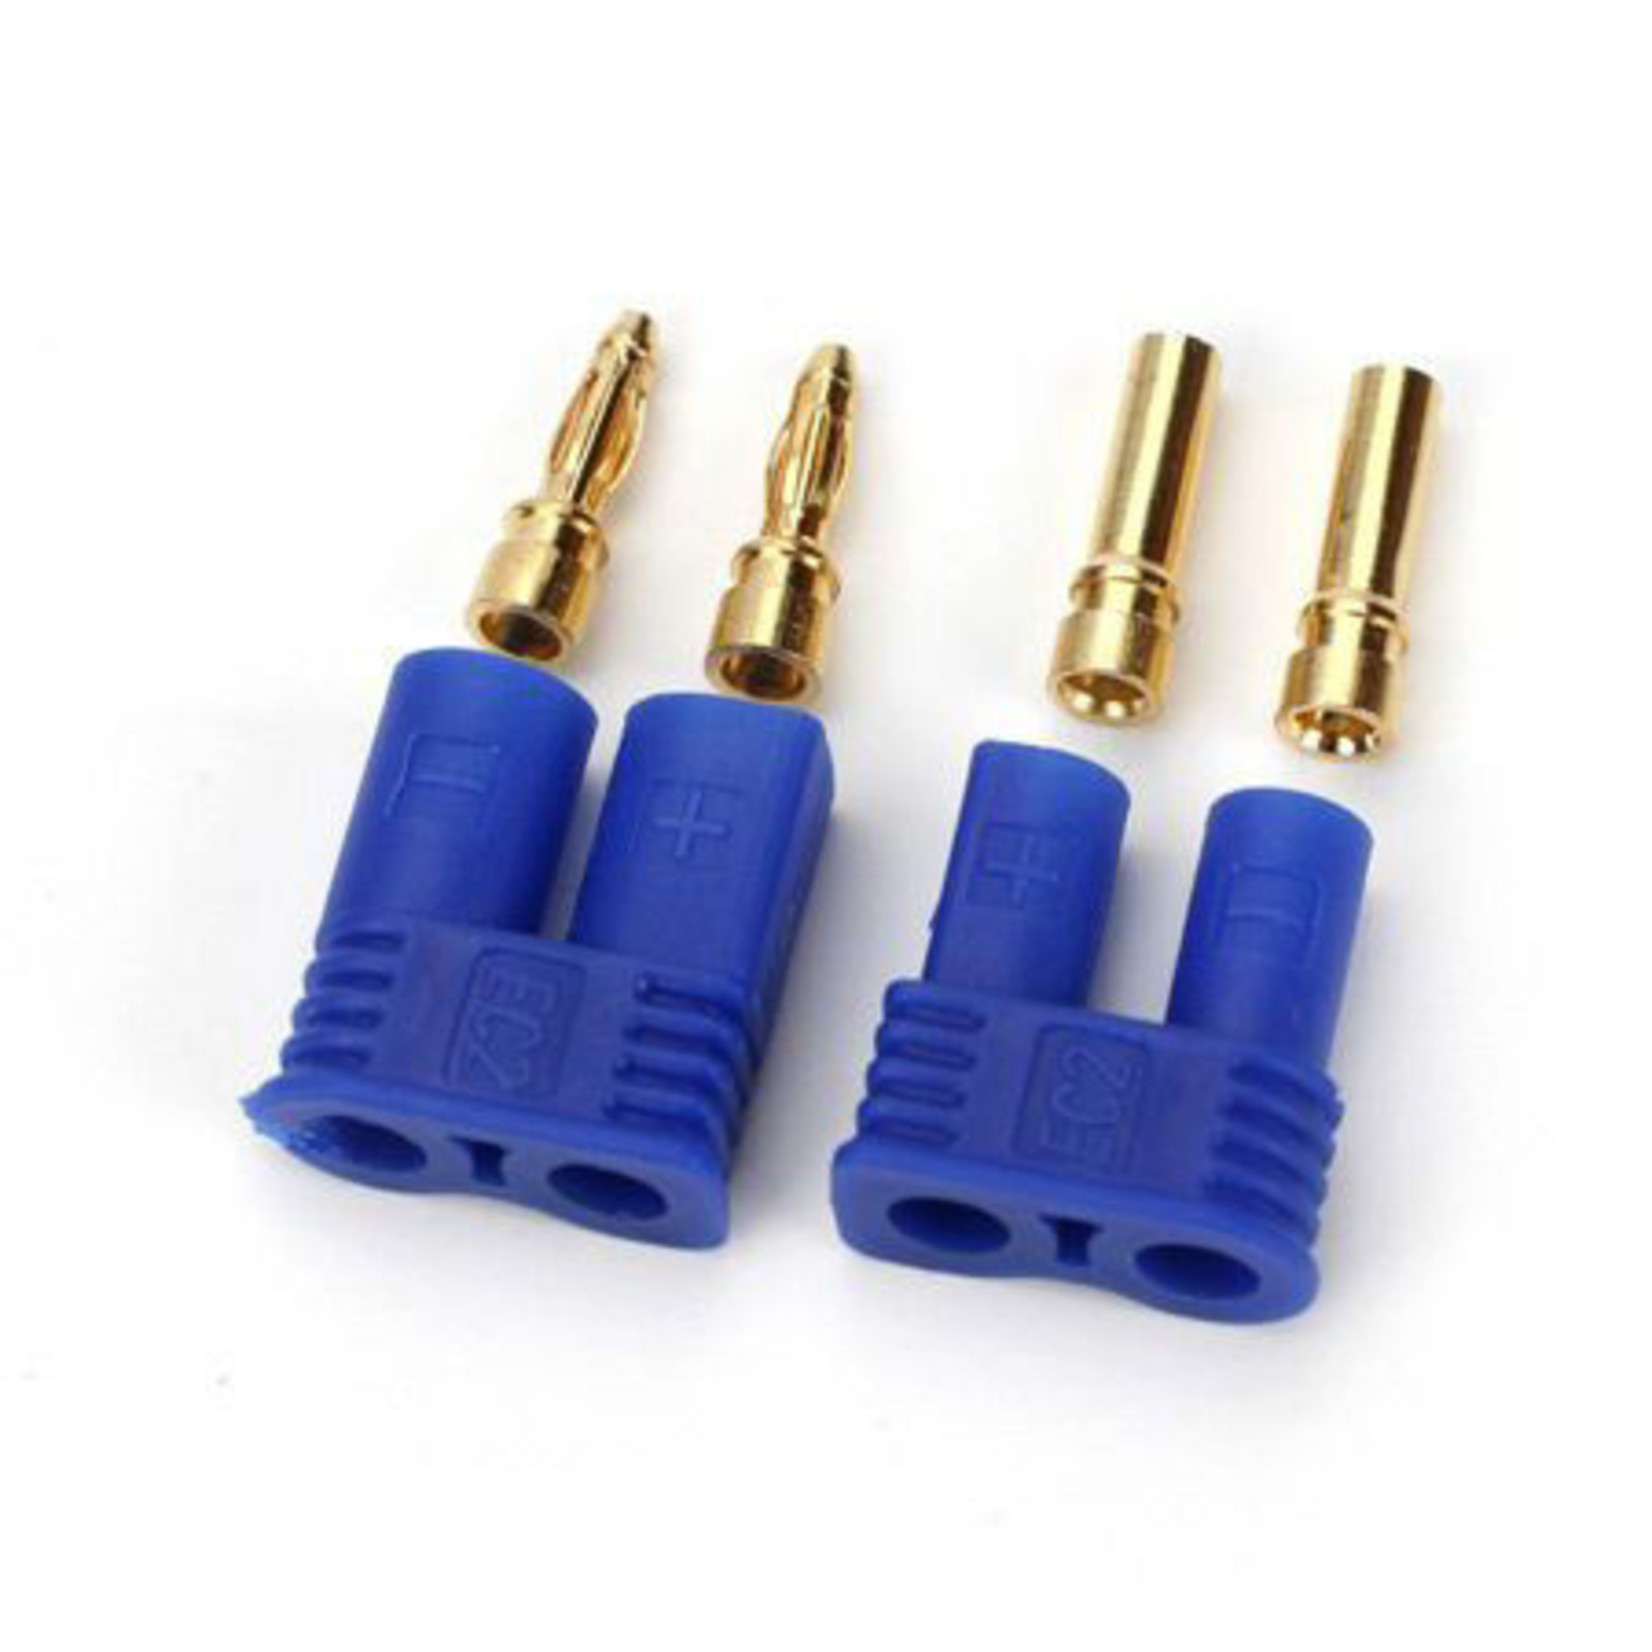 Dynamite RC Connector: EC2 Device and EC2 Battery Set